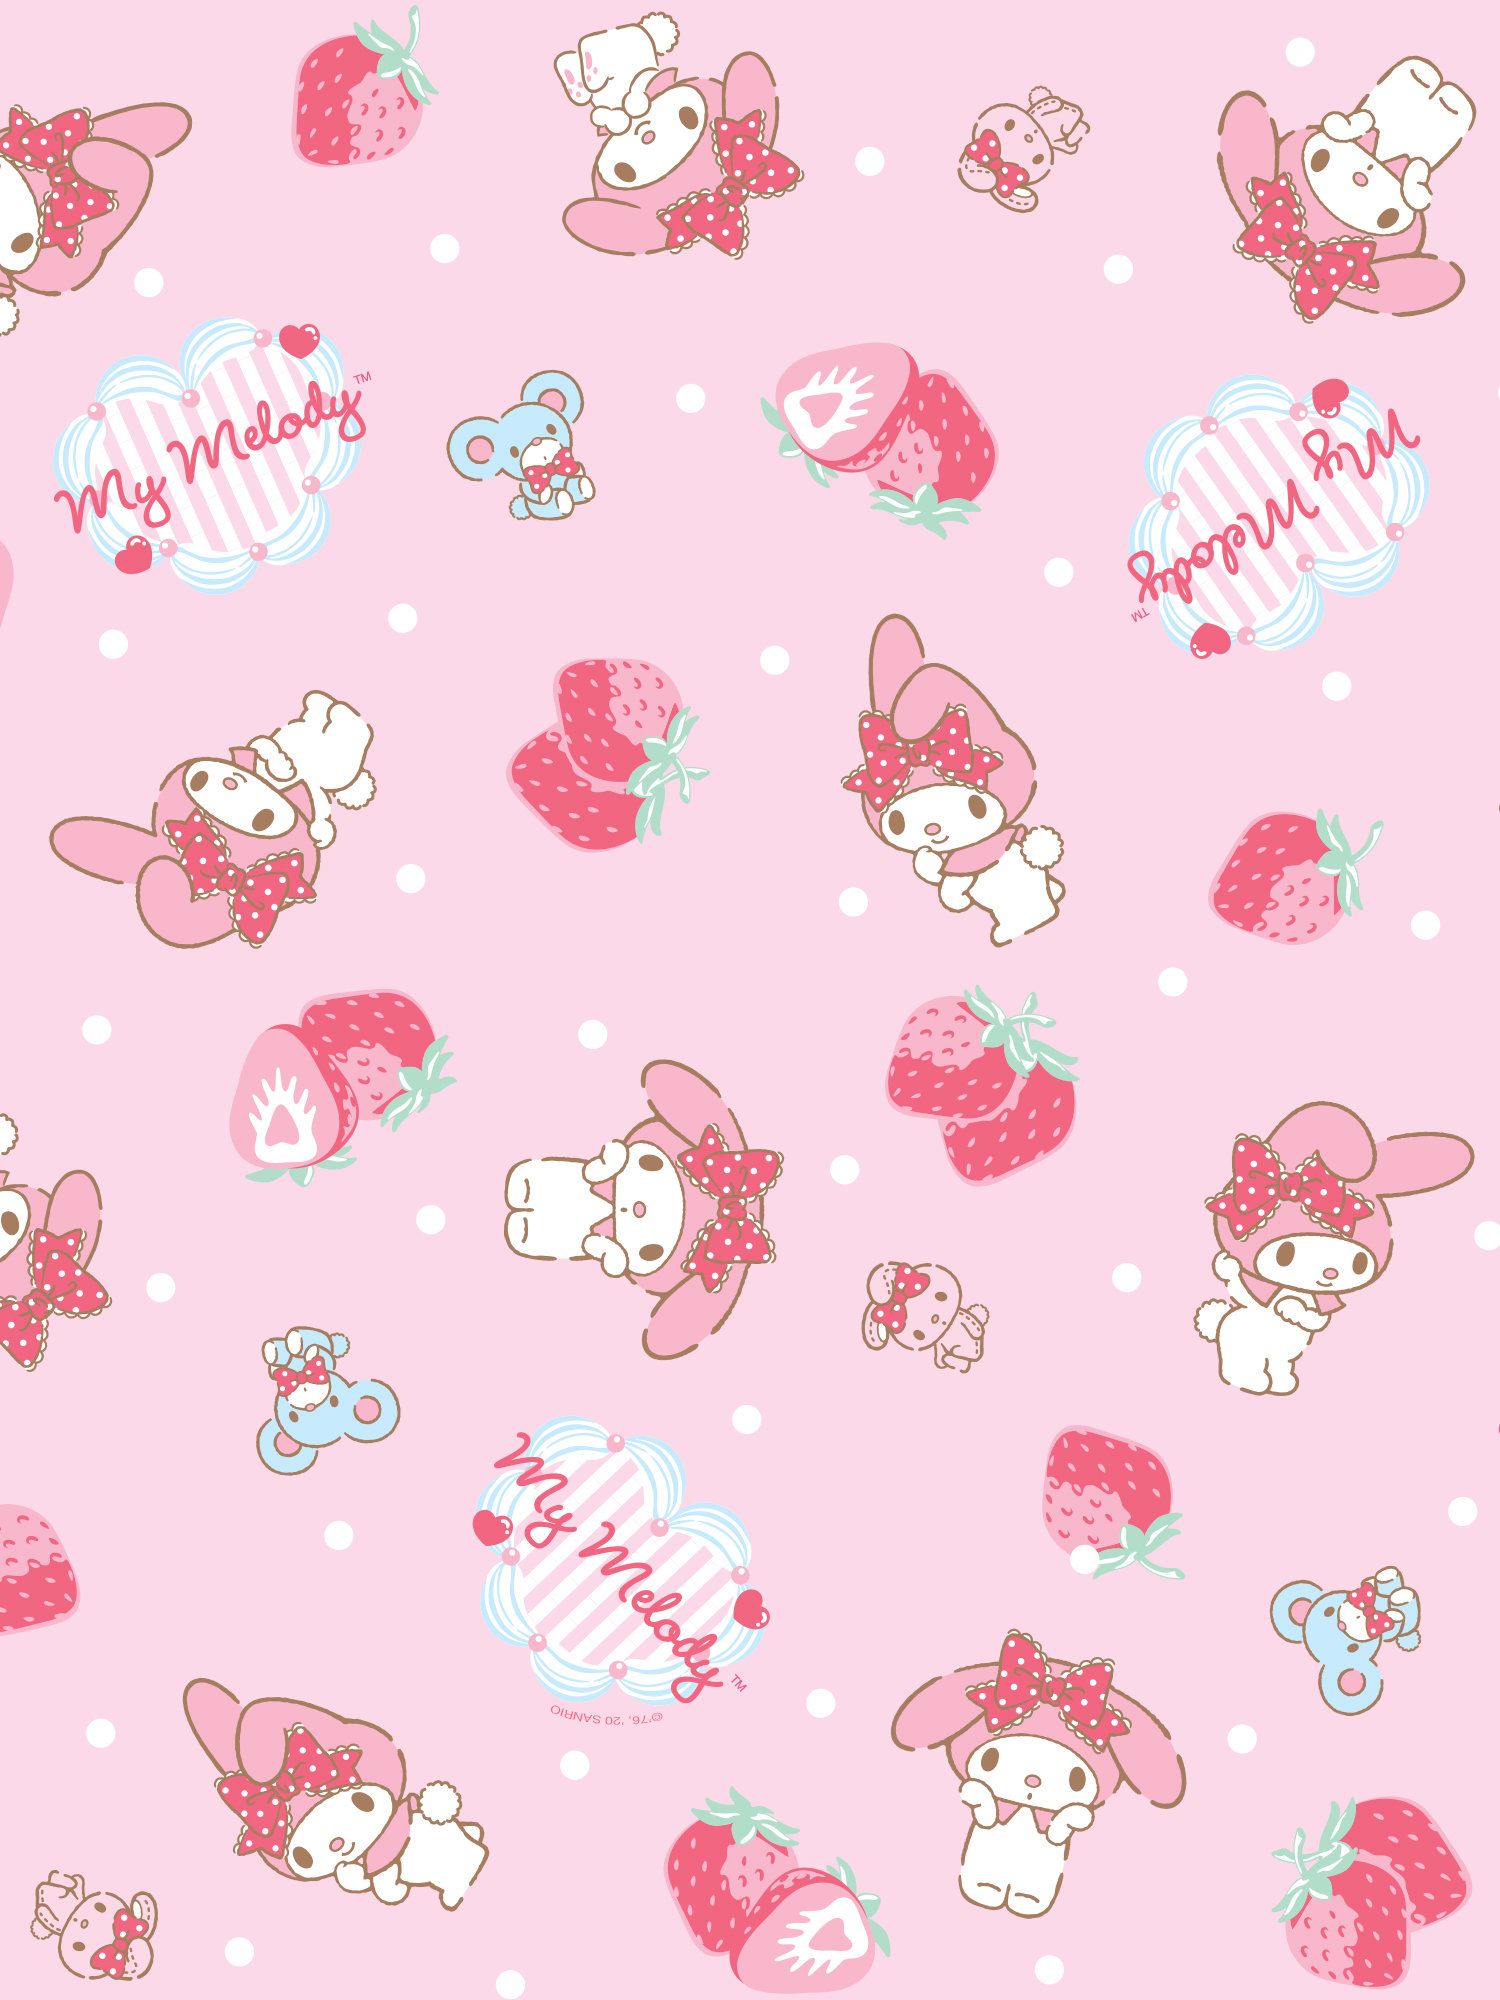 A pink background with cute cartoon characters - Sanrio